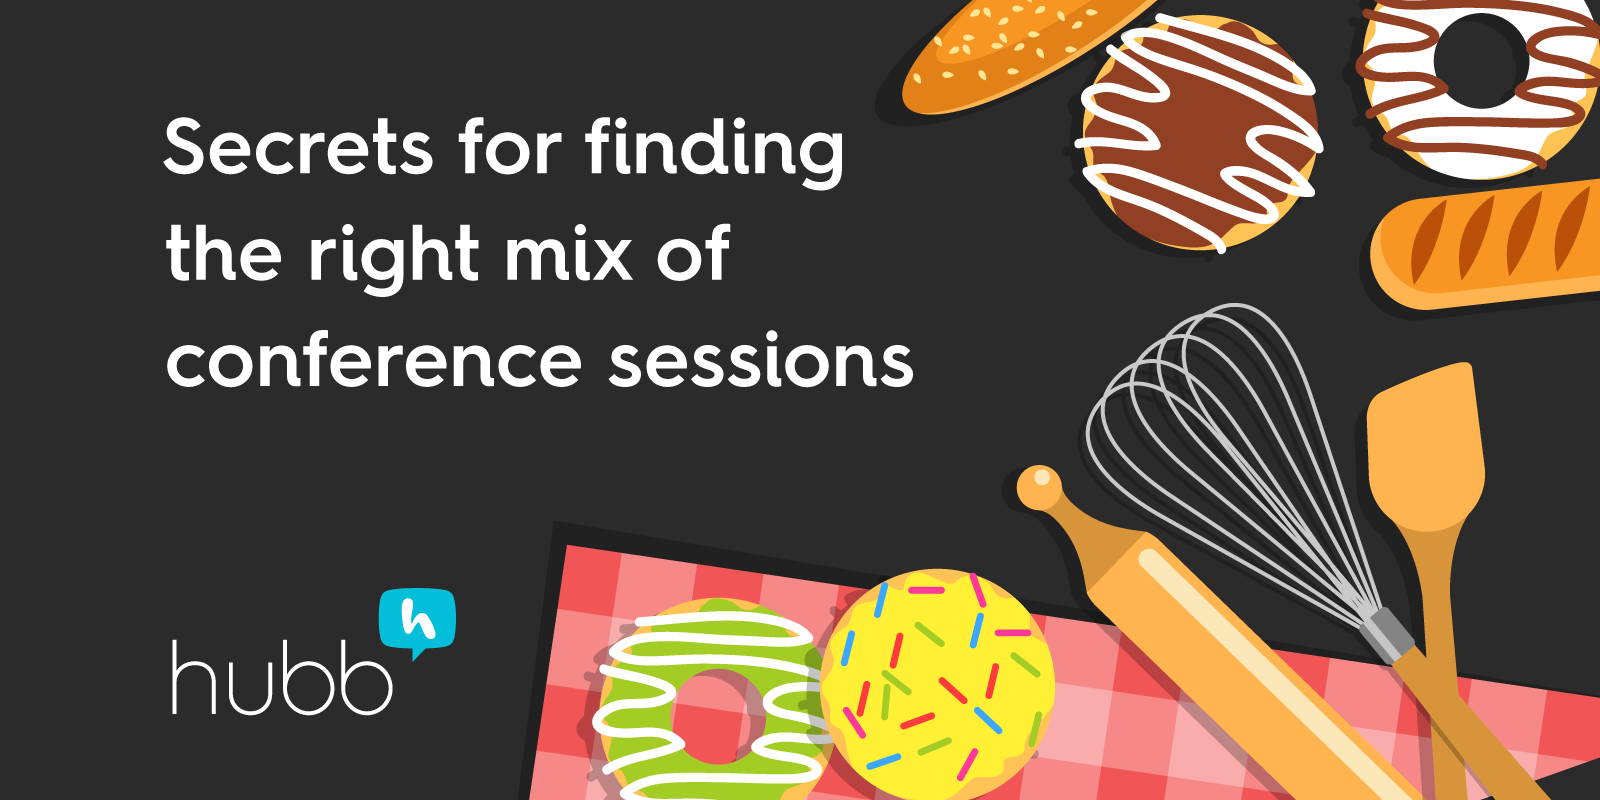 Secrets for finding the right mix of conference sessions